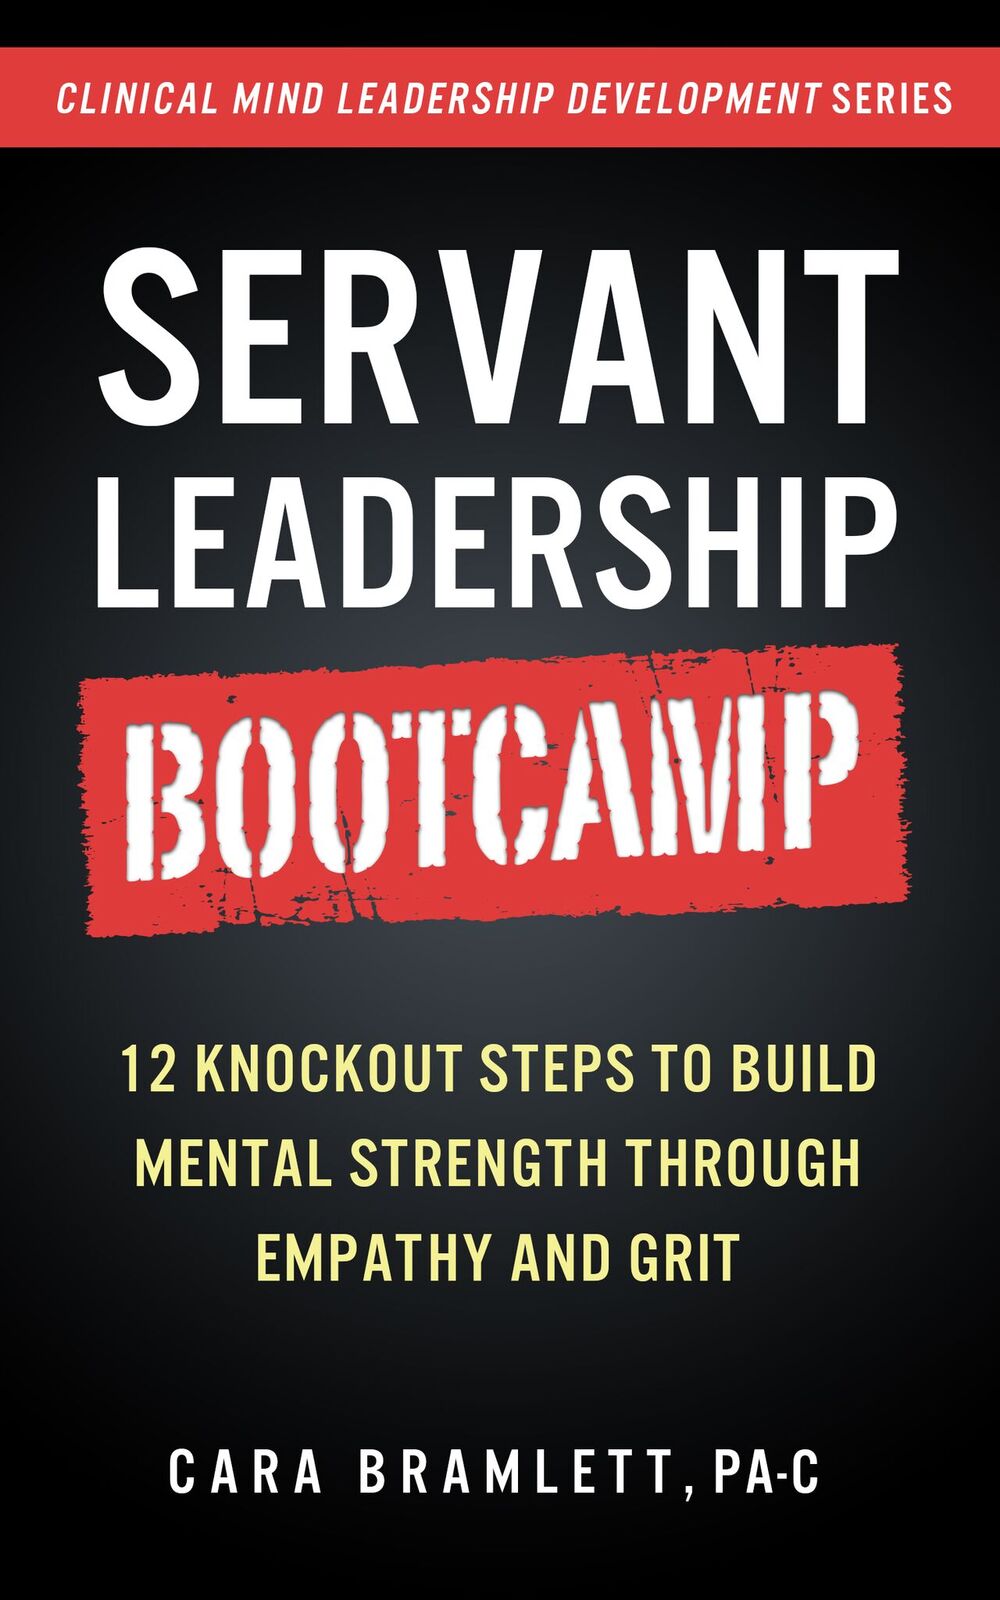 FREE: Servant Leadership Bootcamp: 12 Knockout Steps to Build Mental Strength with Empathy and GRIT by Cara Bramlett